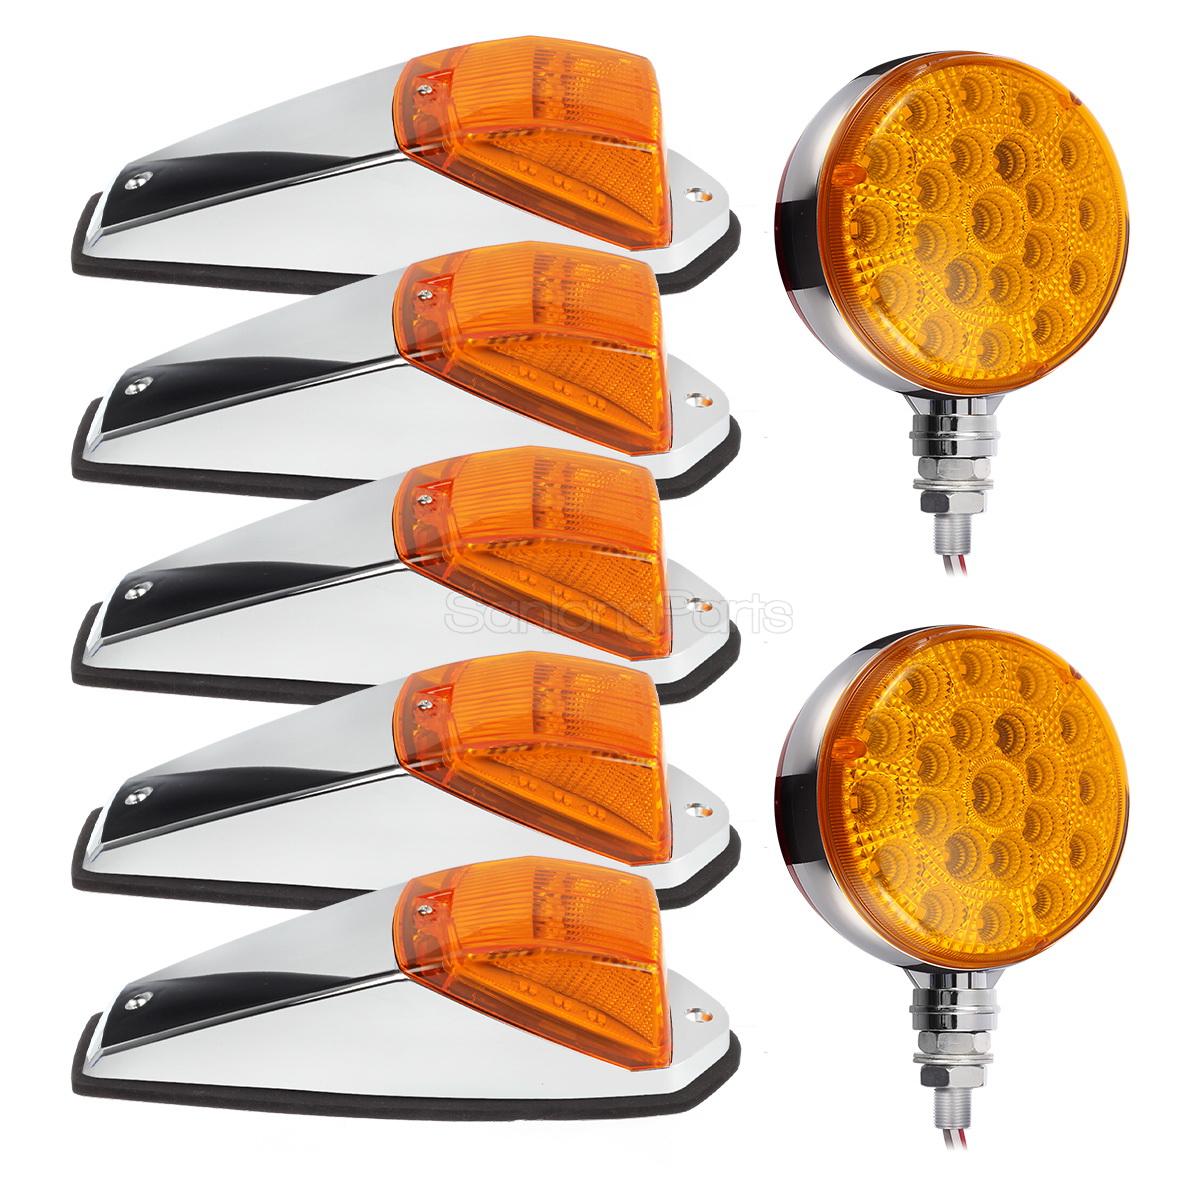 5xAmber 31LED Cab Marker Roof Top Lights+2pc Stop Turn Tail Lights for Peterbilt